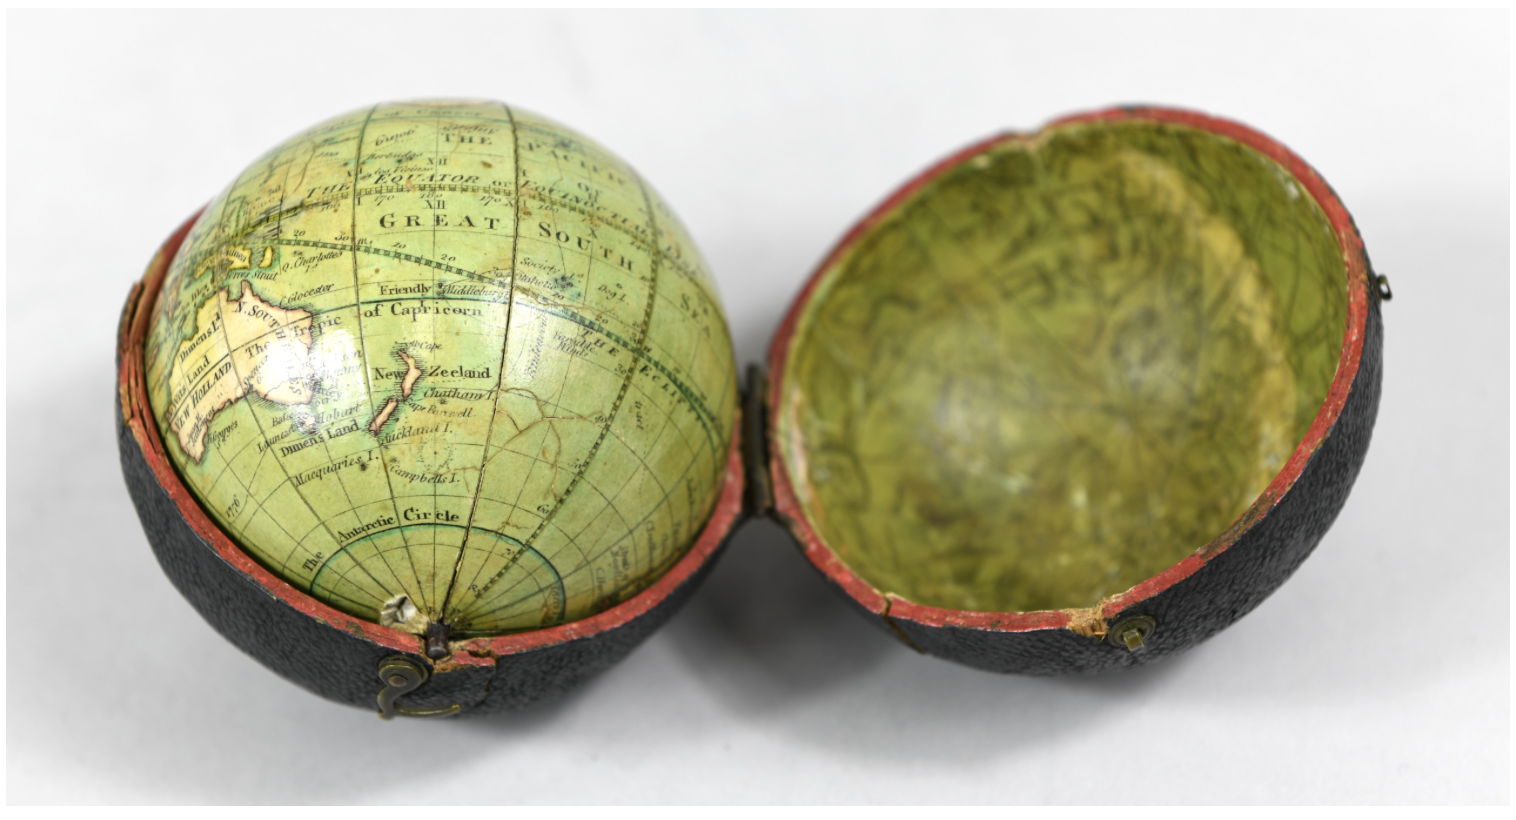 Pocket globe by Thomas Lane (London, c. 1830), Adler Planetarium collections. This globe was symbolically taken aboard Space Shuttle Discovery in 1999 during the mission STS-103. 